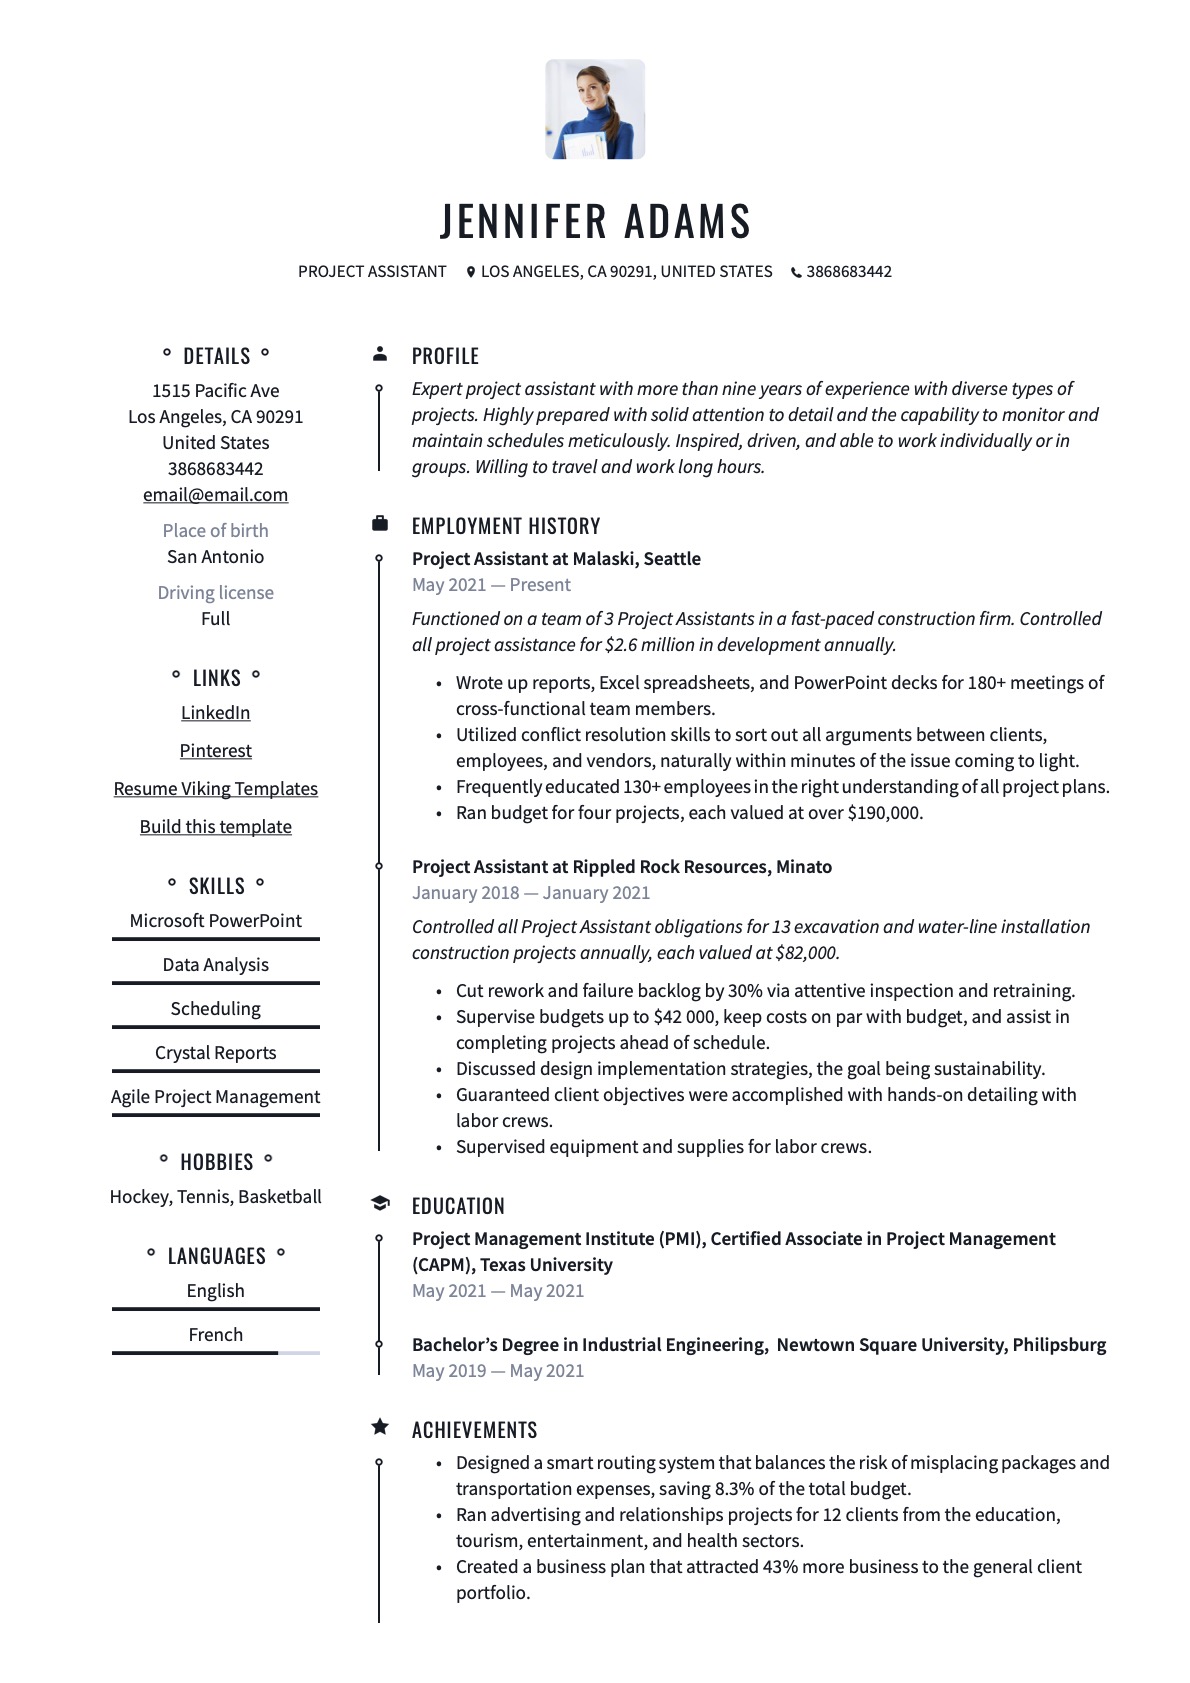 Professional Project Assistant Resume Example